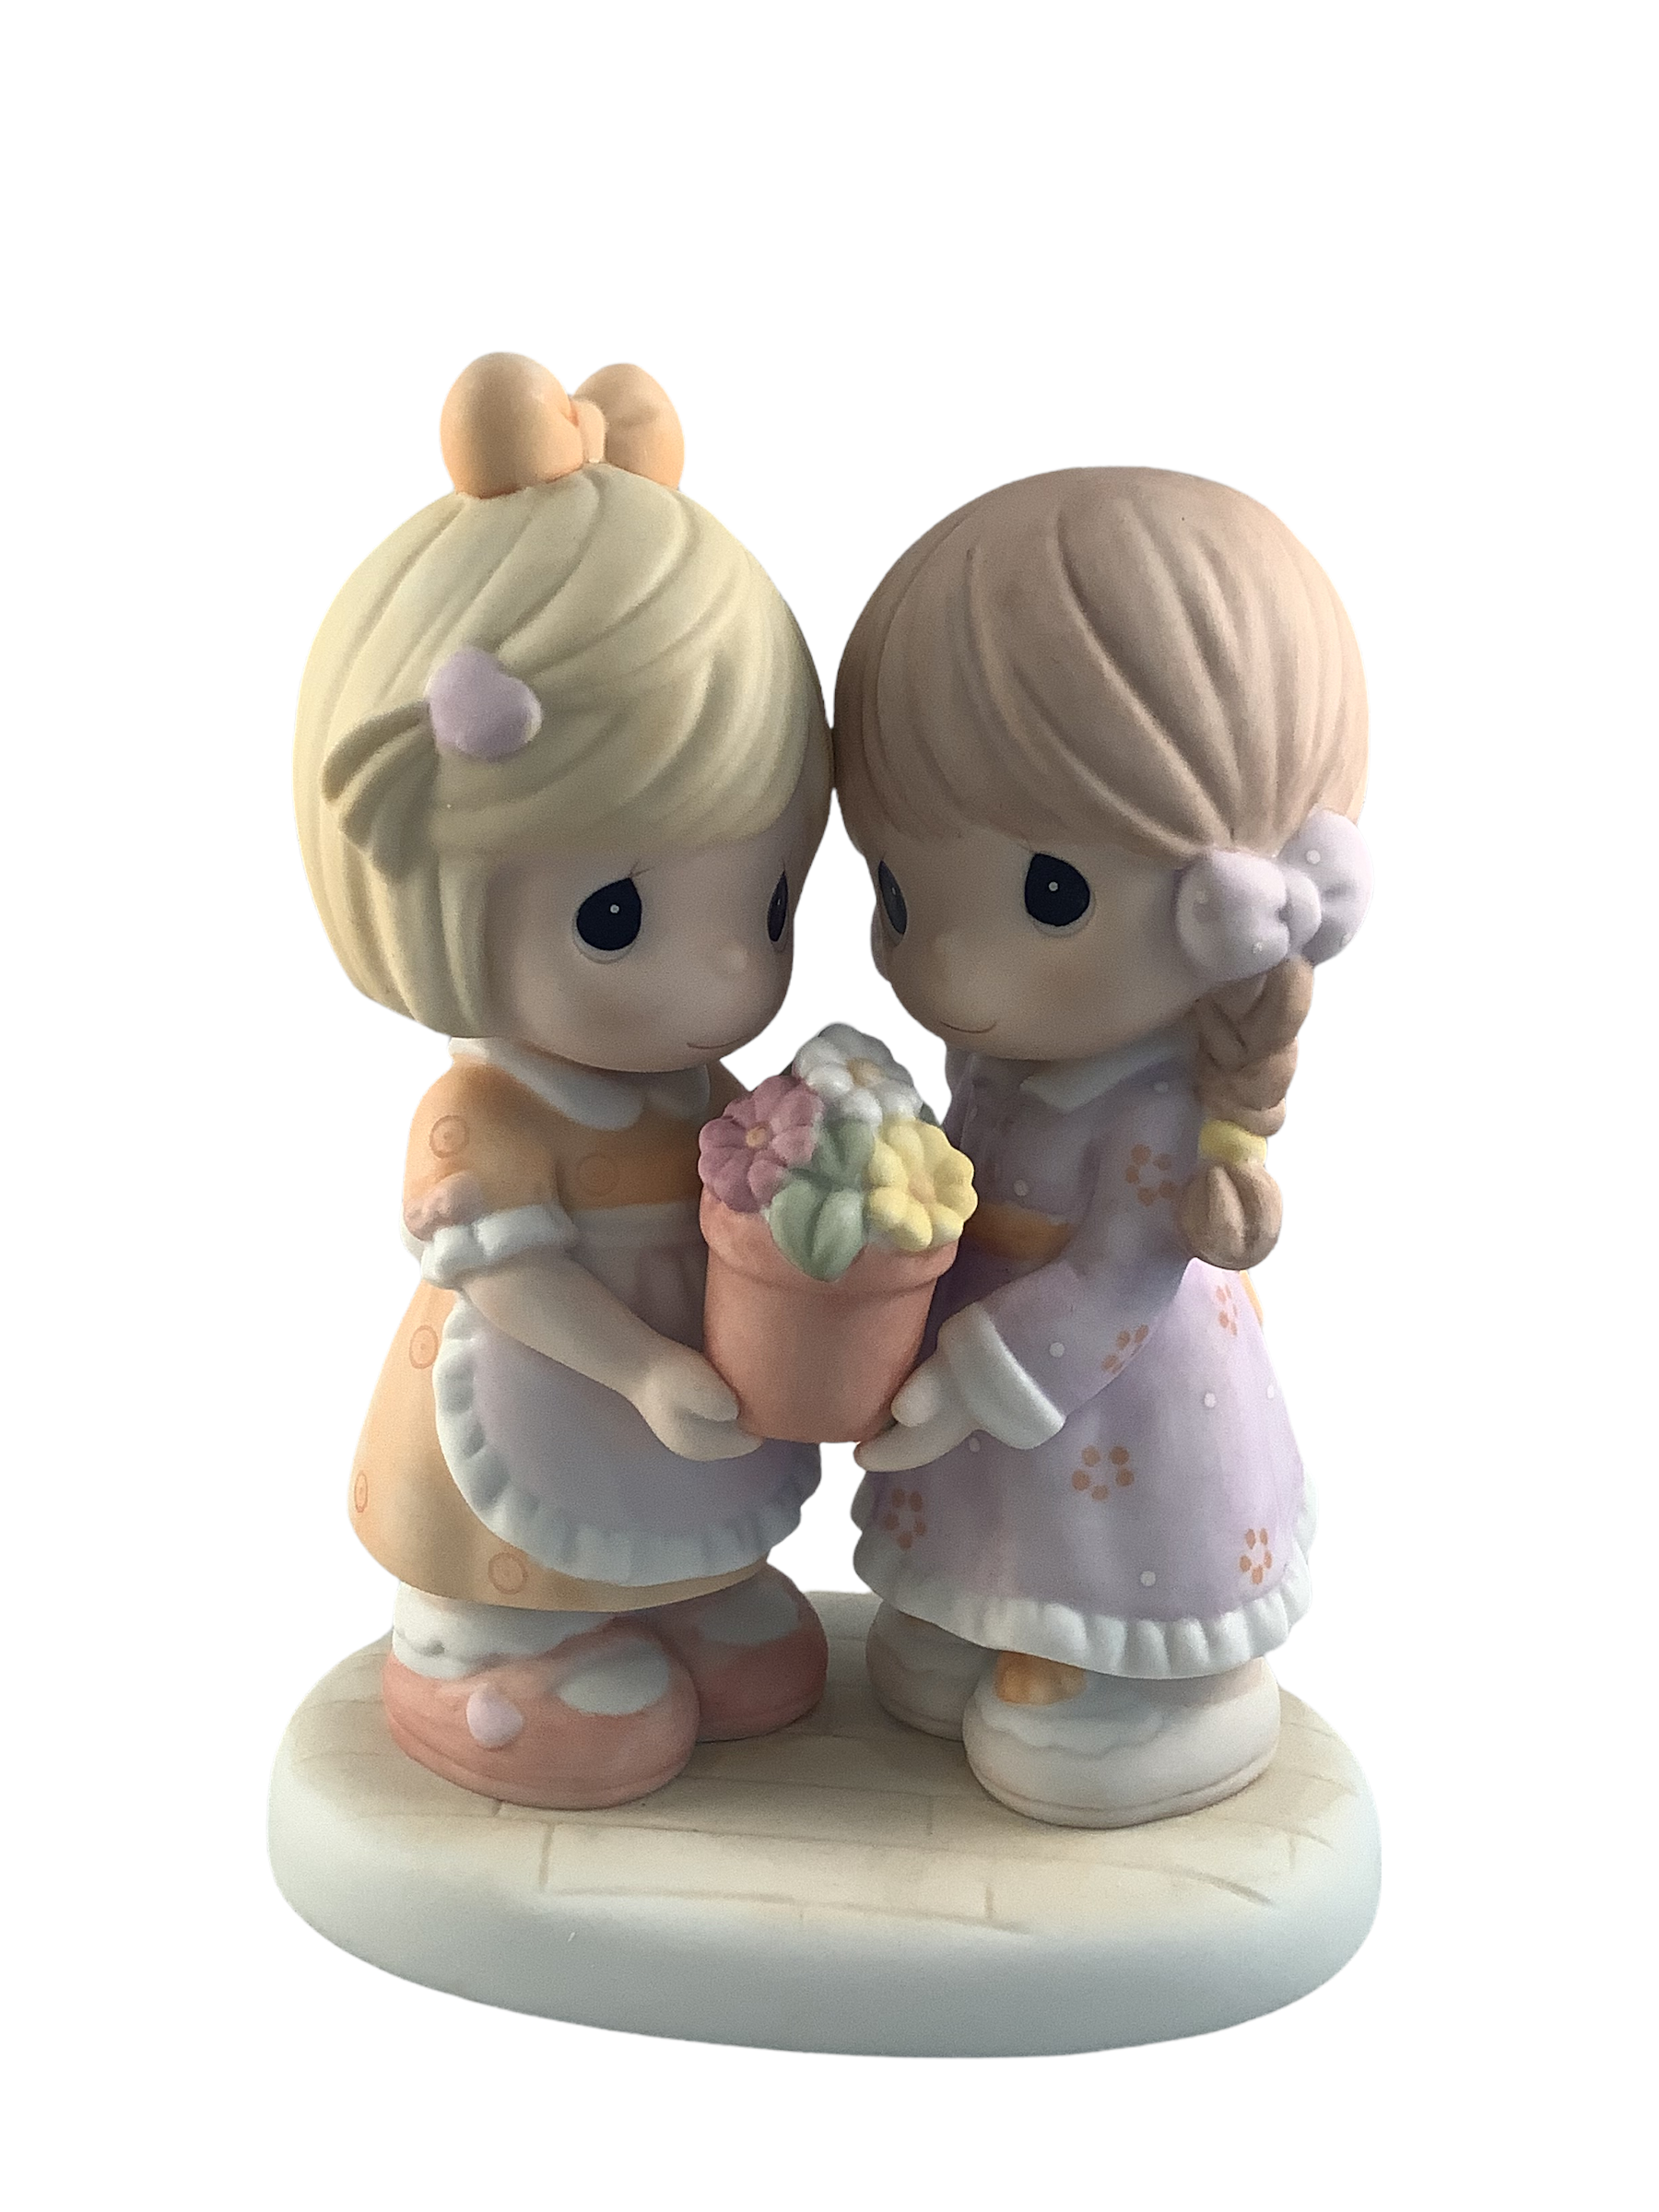 Flowers And Friendship Are Best When Shared - Precious Moment Figurine